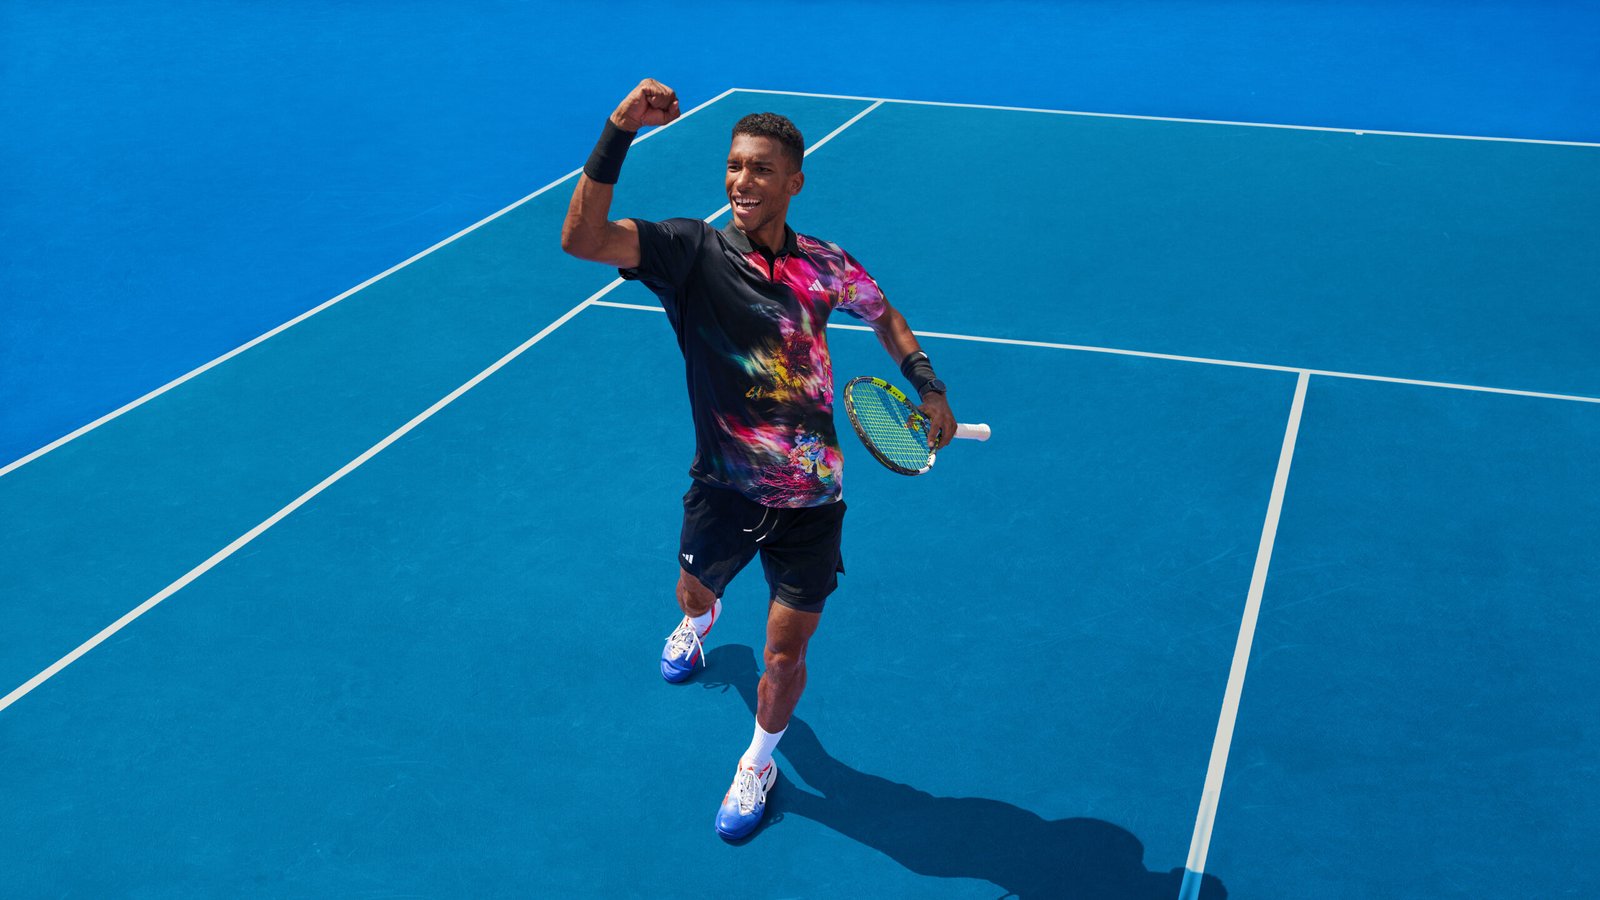 ADIDAS INTRODUCES THE NEW SS23 MELBOURNE TENNIS COLLECTION DESIGNED TO REVIEW MATERIALS AND IMPROVE PERFORMANCE © Copyright PLPG GLOBAL MEDIA 2023